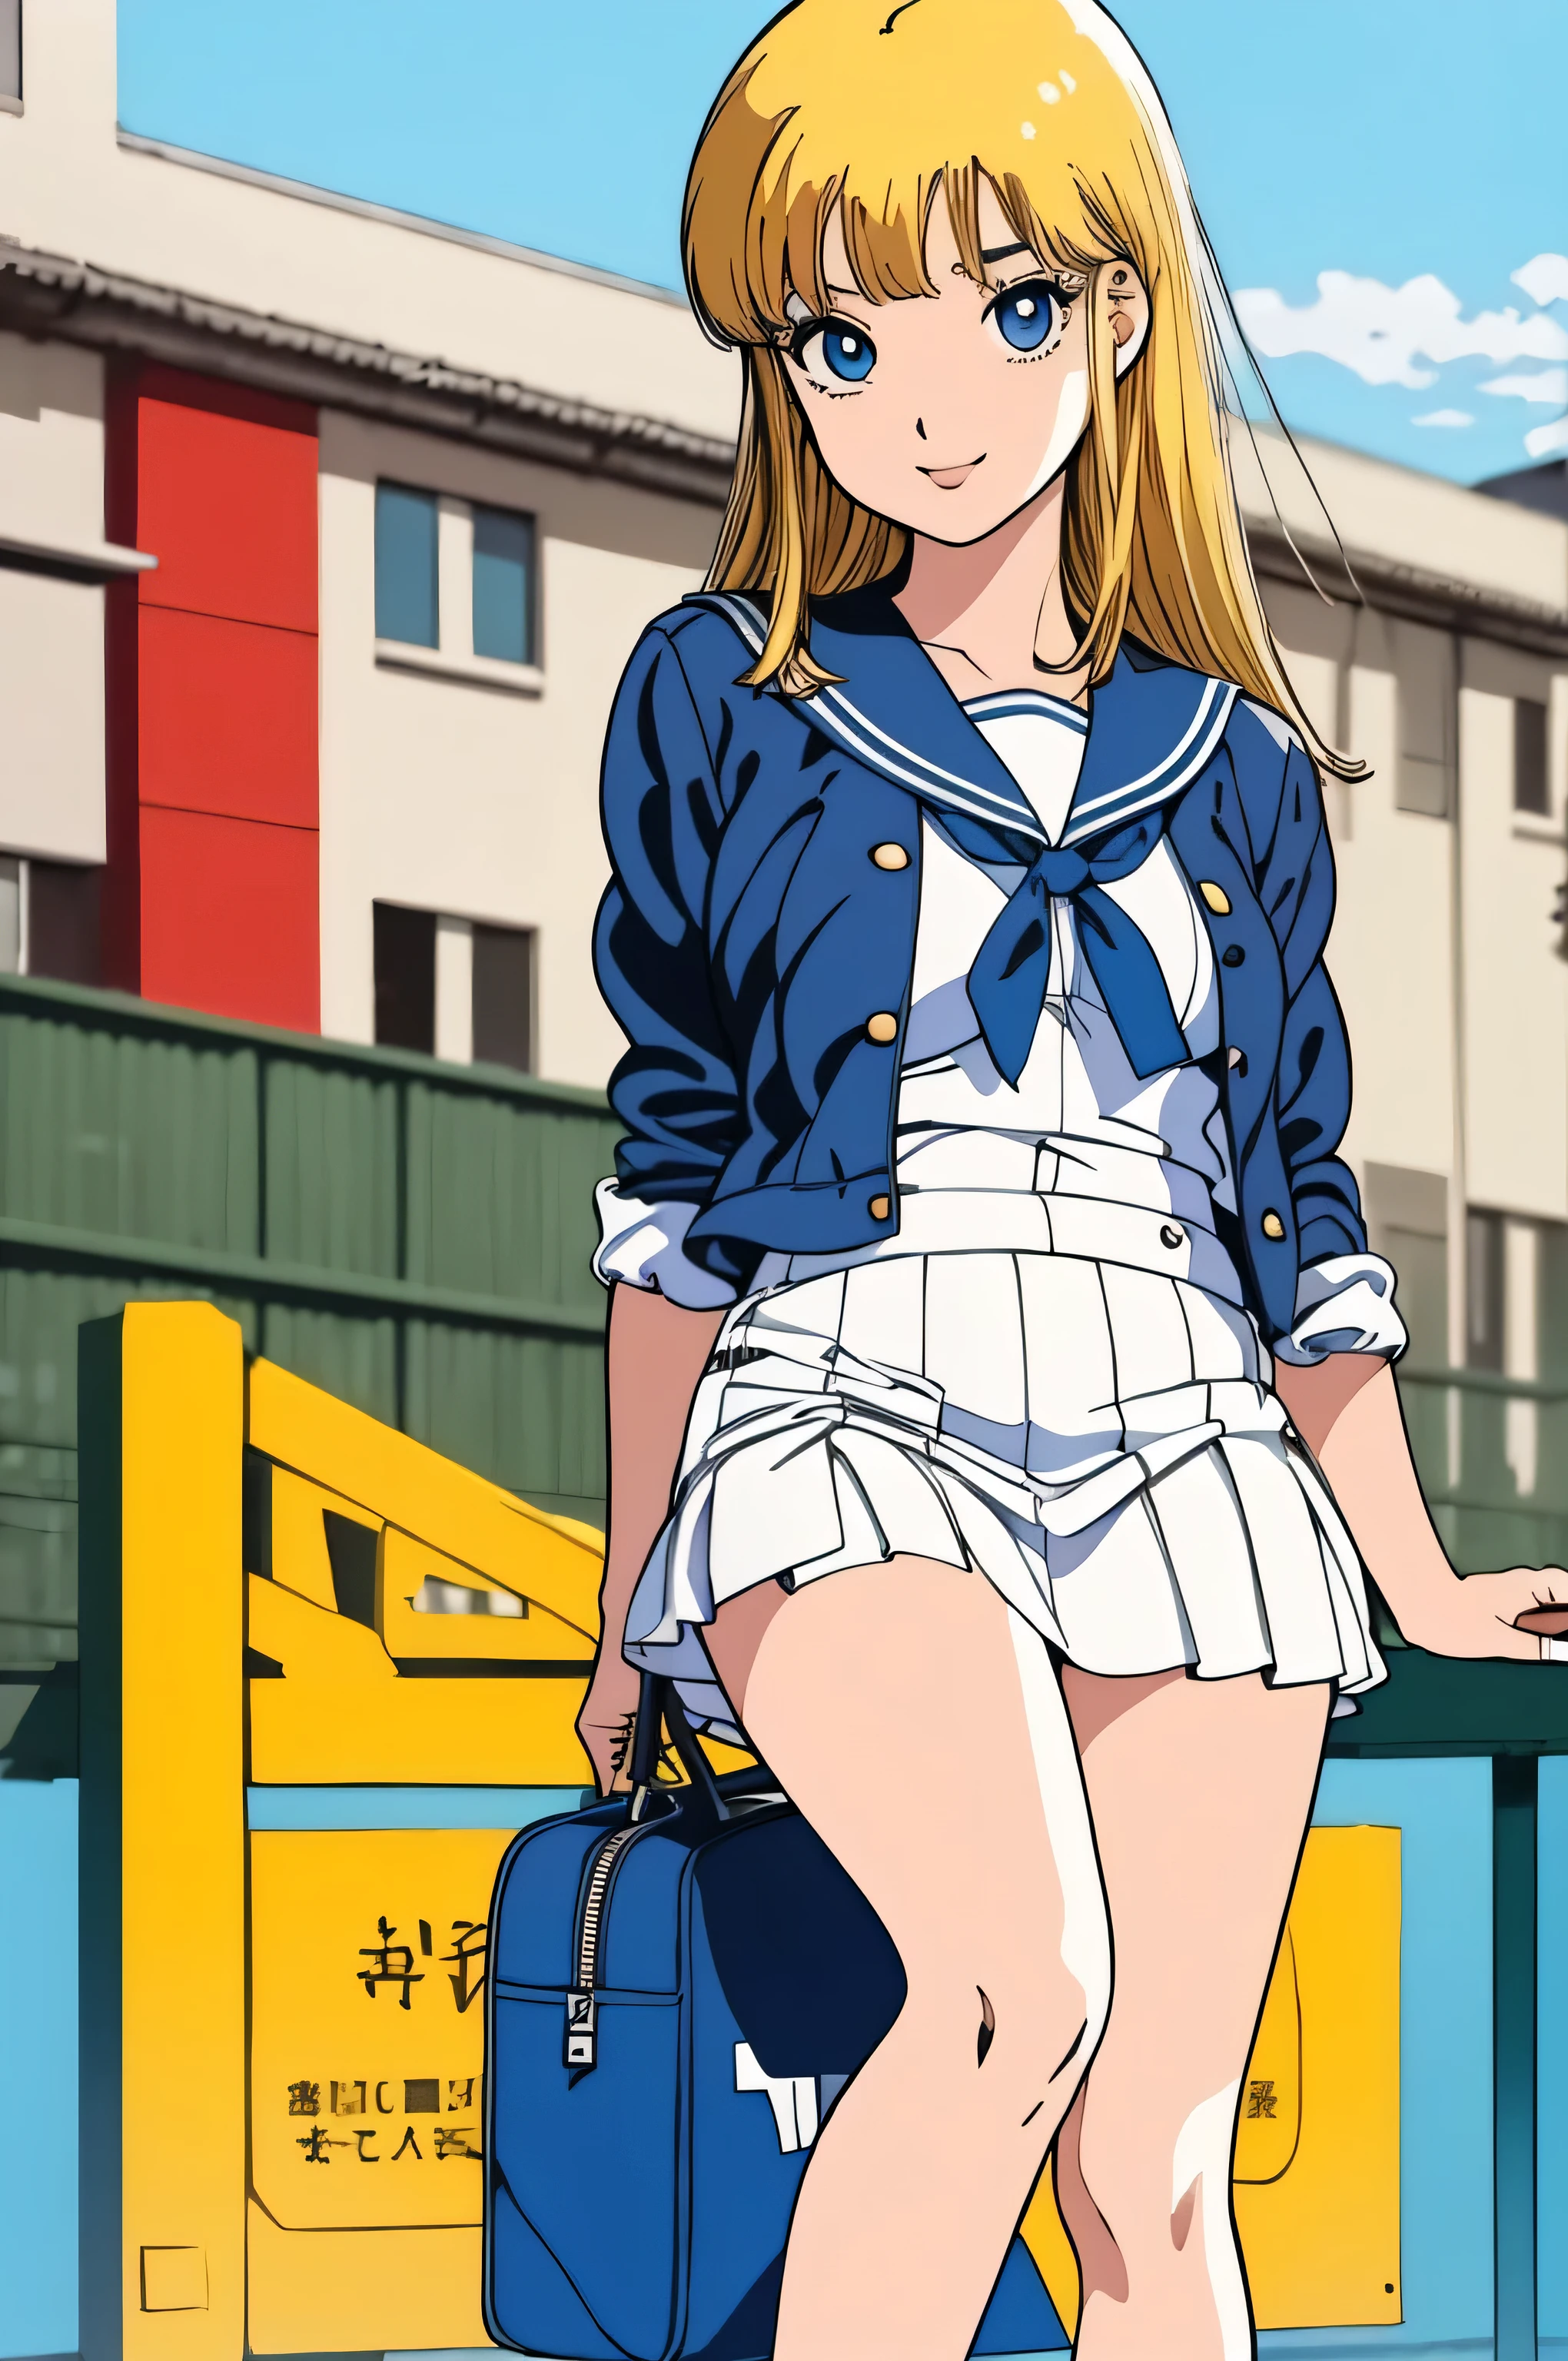 (Masterpiece Anime, Retro art style, Clean brush strokes, Very detailed, Perfect Anatomy, Browsing Caution), City Background, (Above the knee shot), (hibarikun), １Girl, Eyebrows visible through hair, bangs, Blonde Hair, Blue eyes, (Sansakumaru:1.4), (Beautiful and realistic eyes:1.5), Confident々Smile, High Body, Long and beautiful legs, (Mid-chest:1.7), (Cute pose), (Sailor suit top), (Sailor suit miniskirt, Navy blue), Leather student bag,